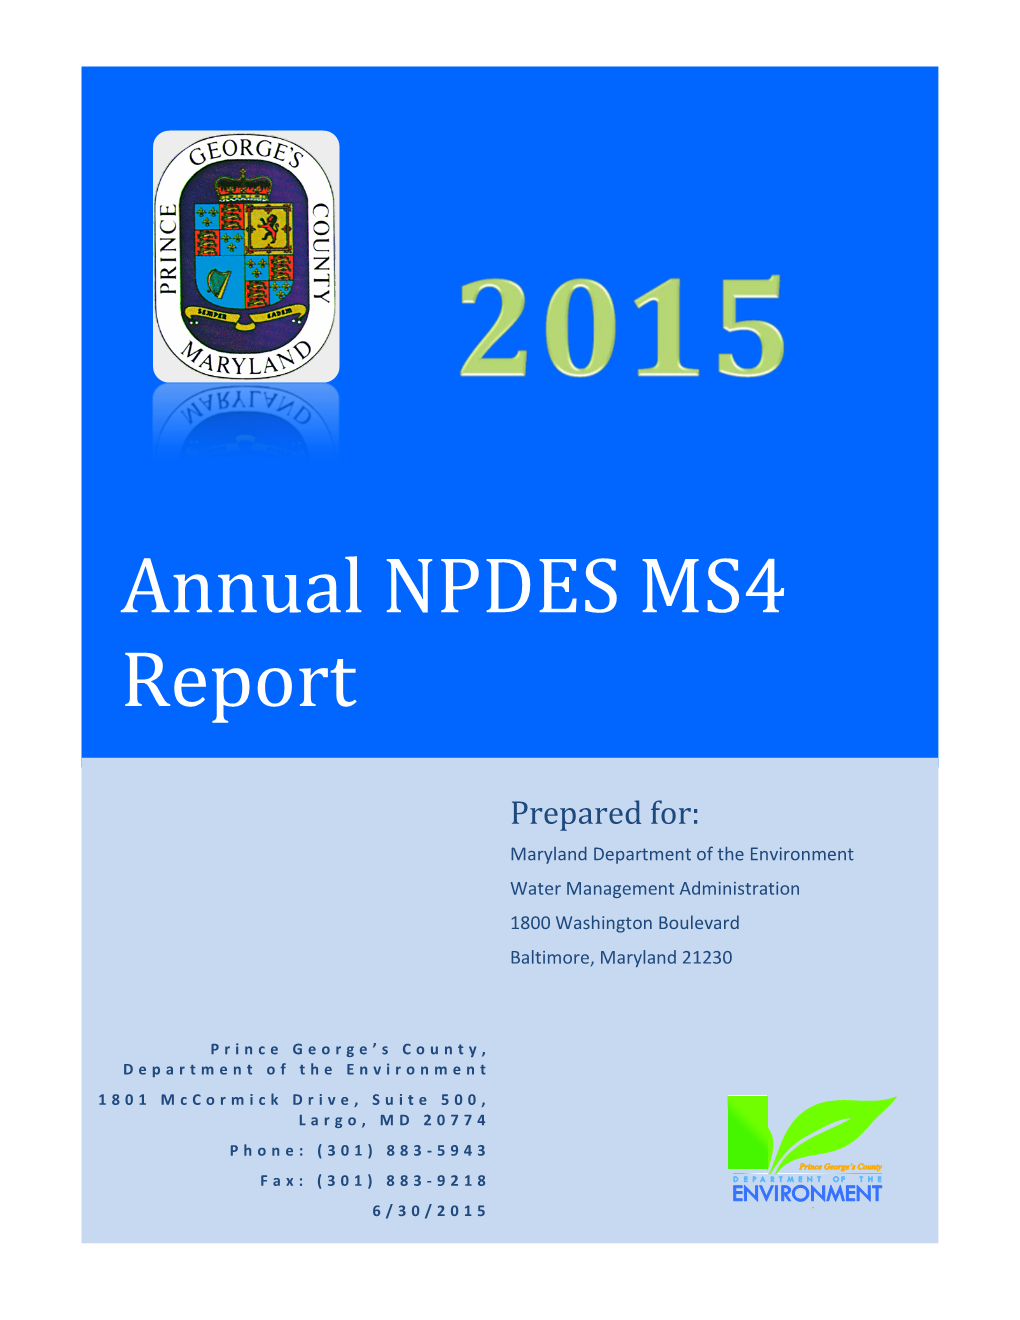 Annual NPDES MS4 Report 2015